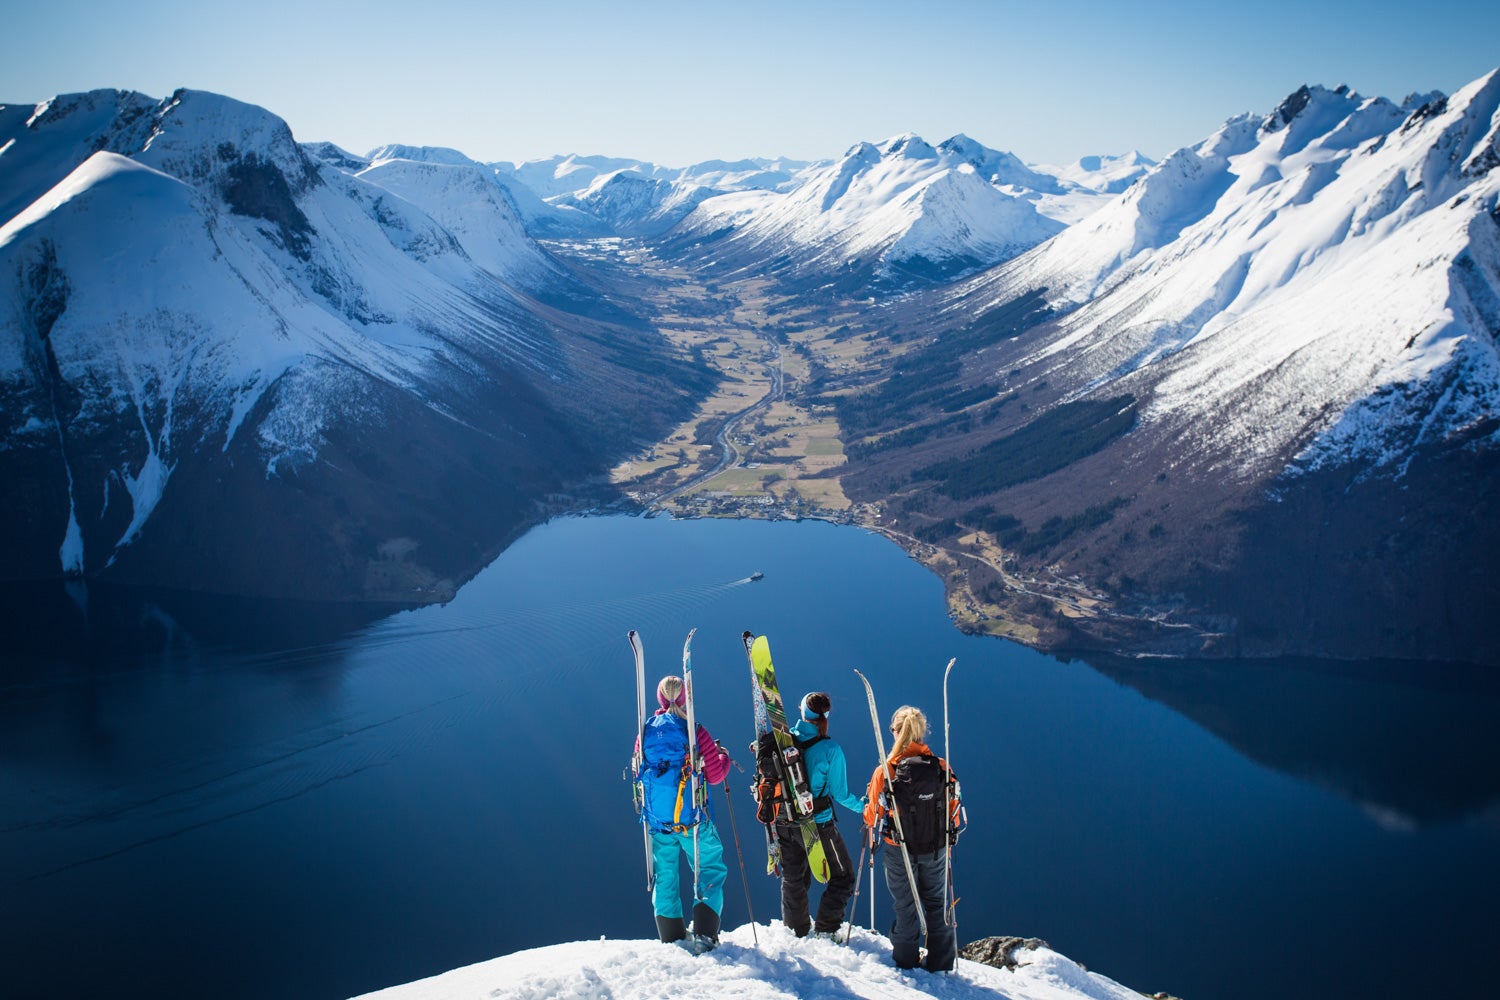 Up Norway’s mystery tours might include fjord skiing in the Sunnmore Alps